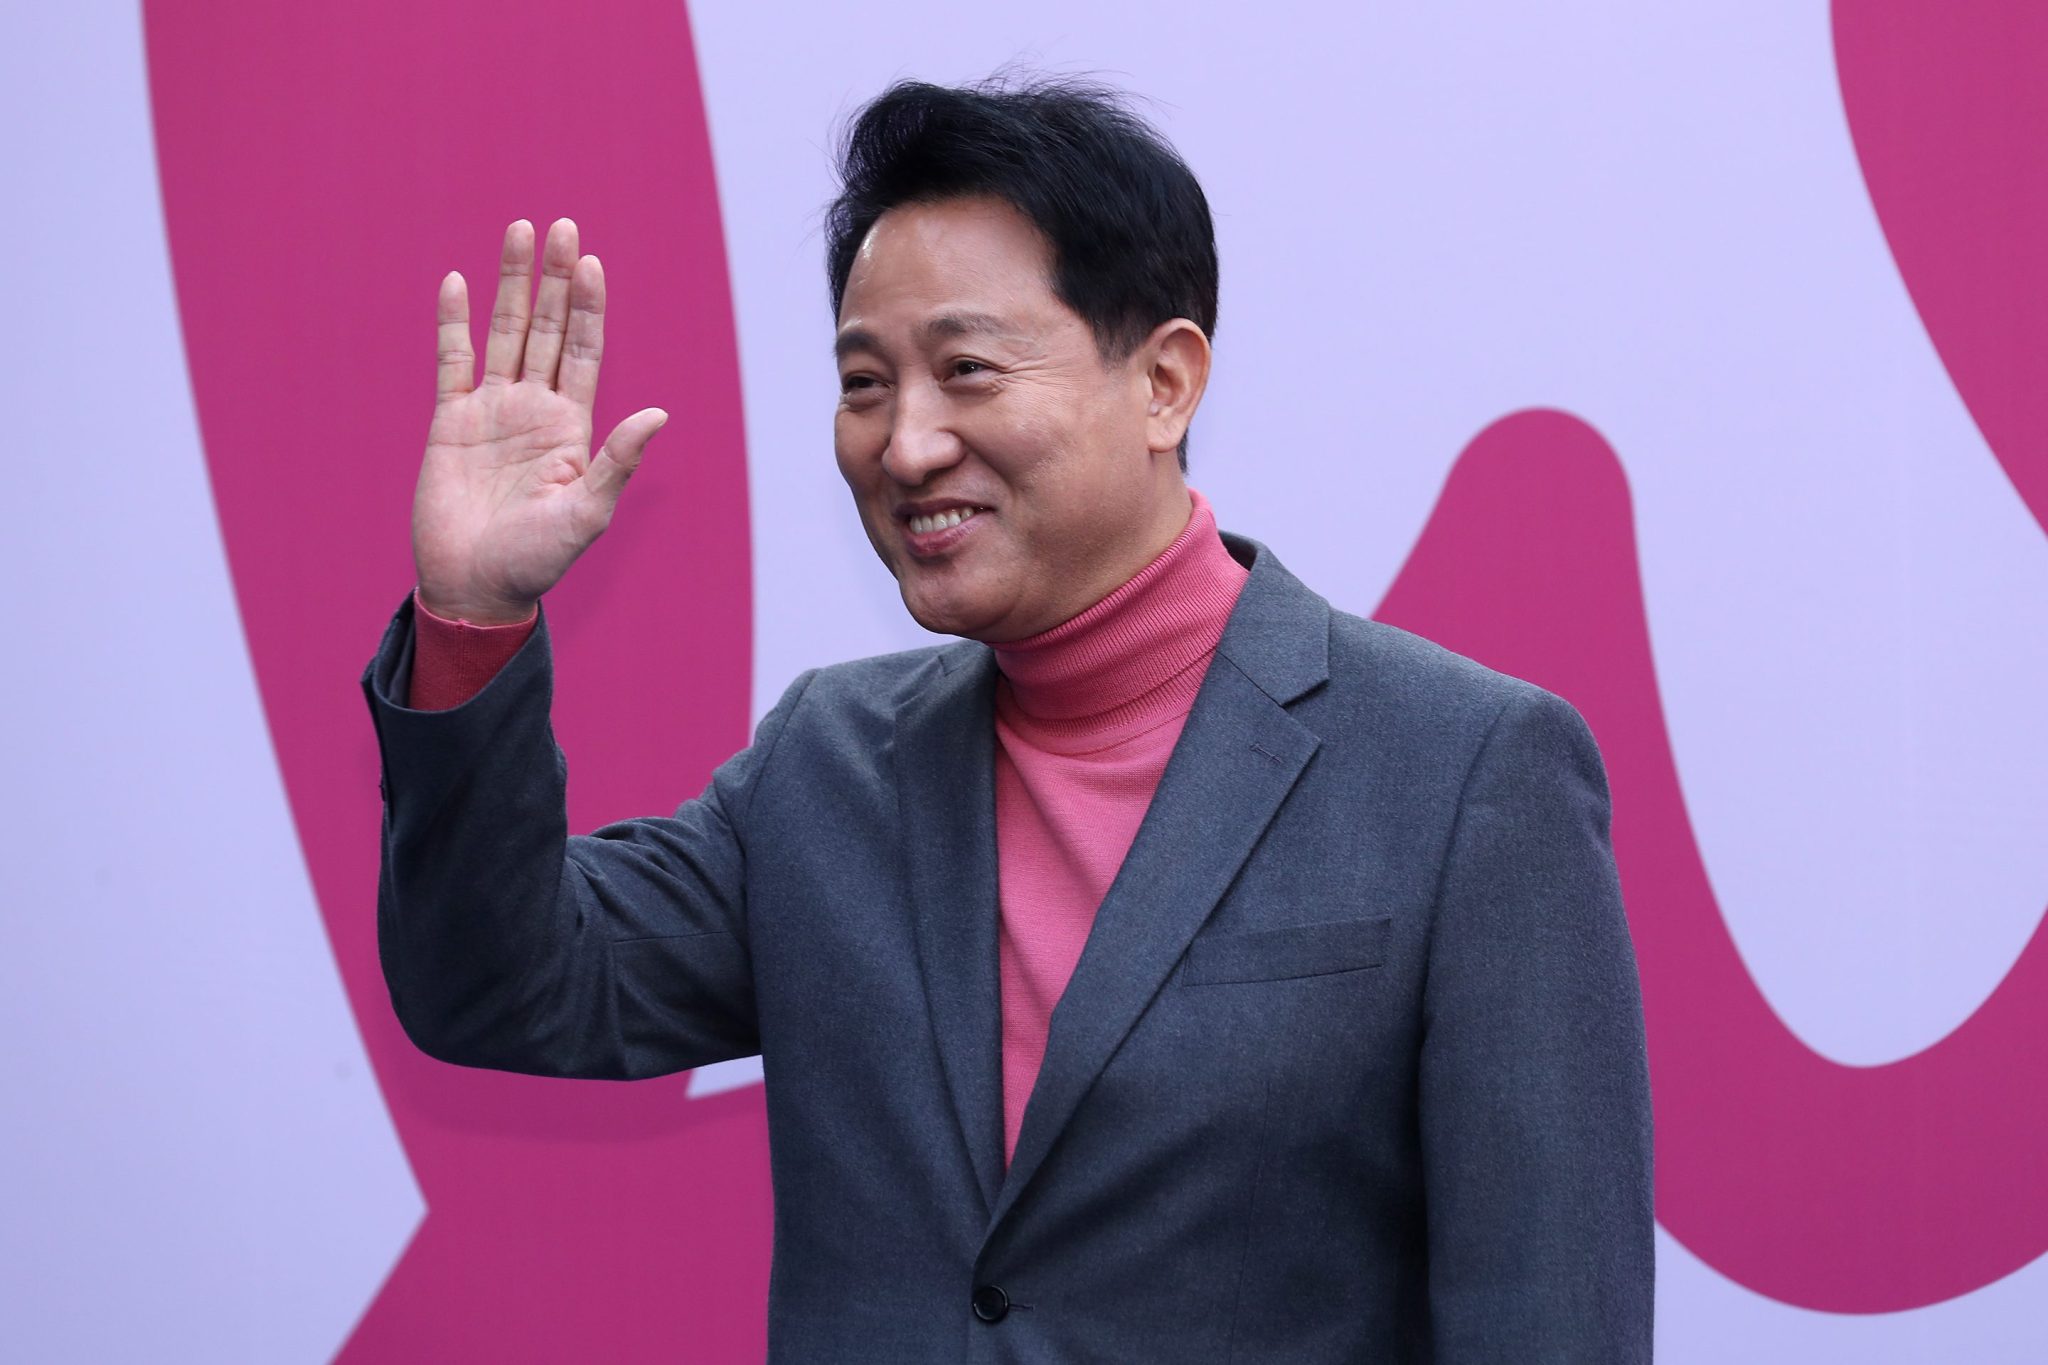 Seoul mayor proposes city-sponsored dating event to boost Korea’s low birth rate